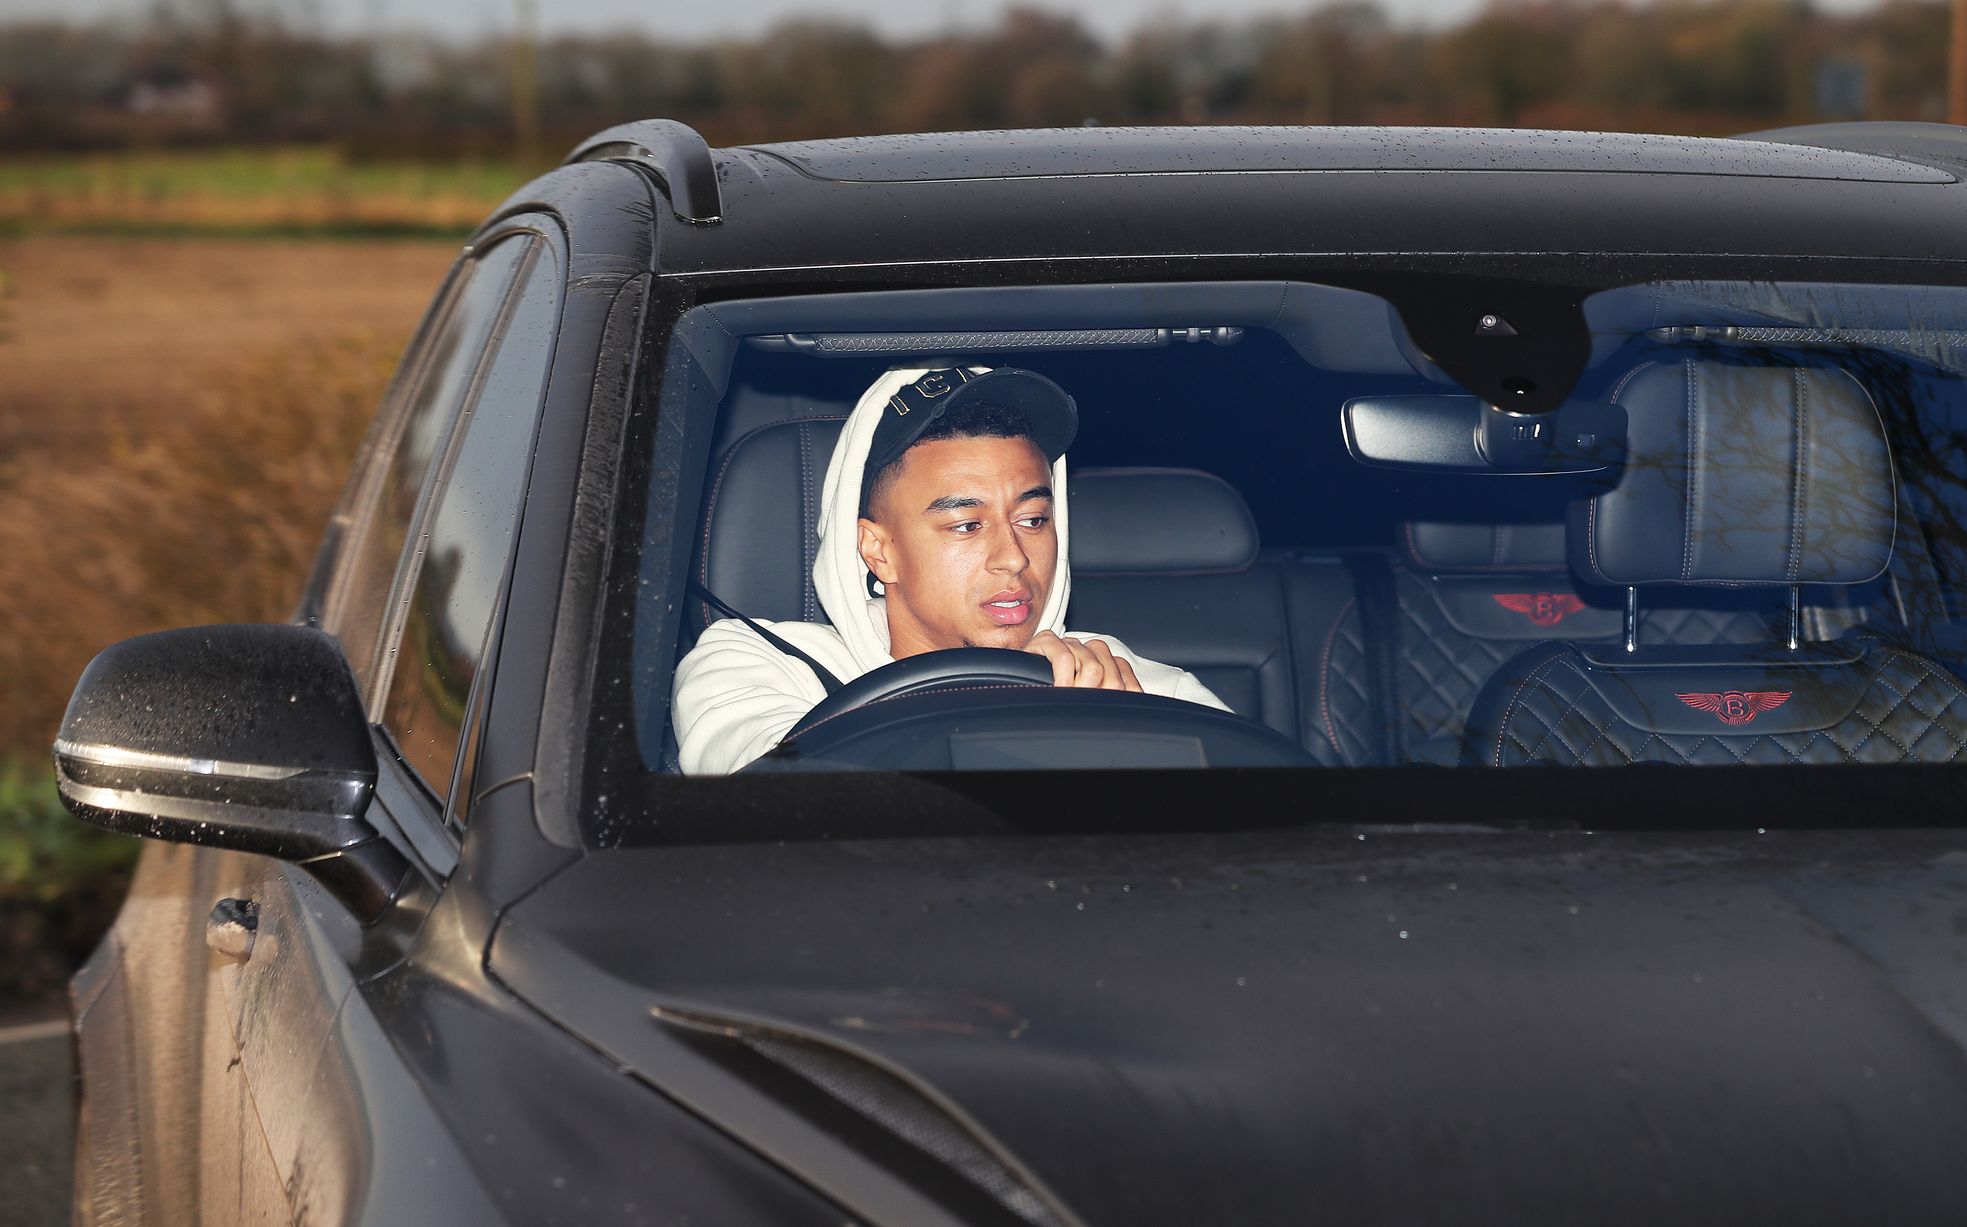 Pictures: Manchester United players arrive at Carrington after Tranmere win - Bóng Đá